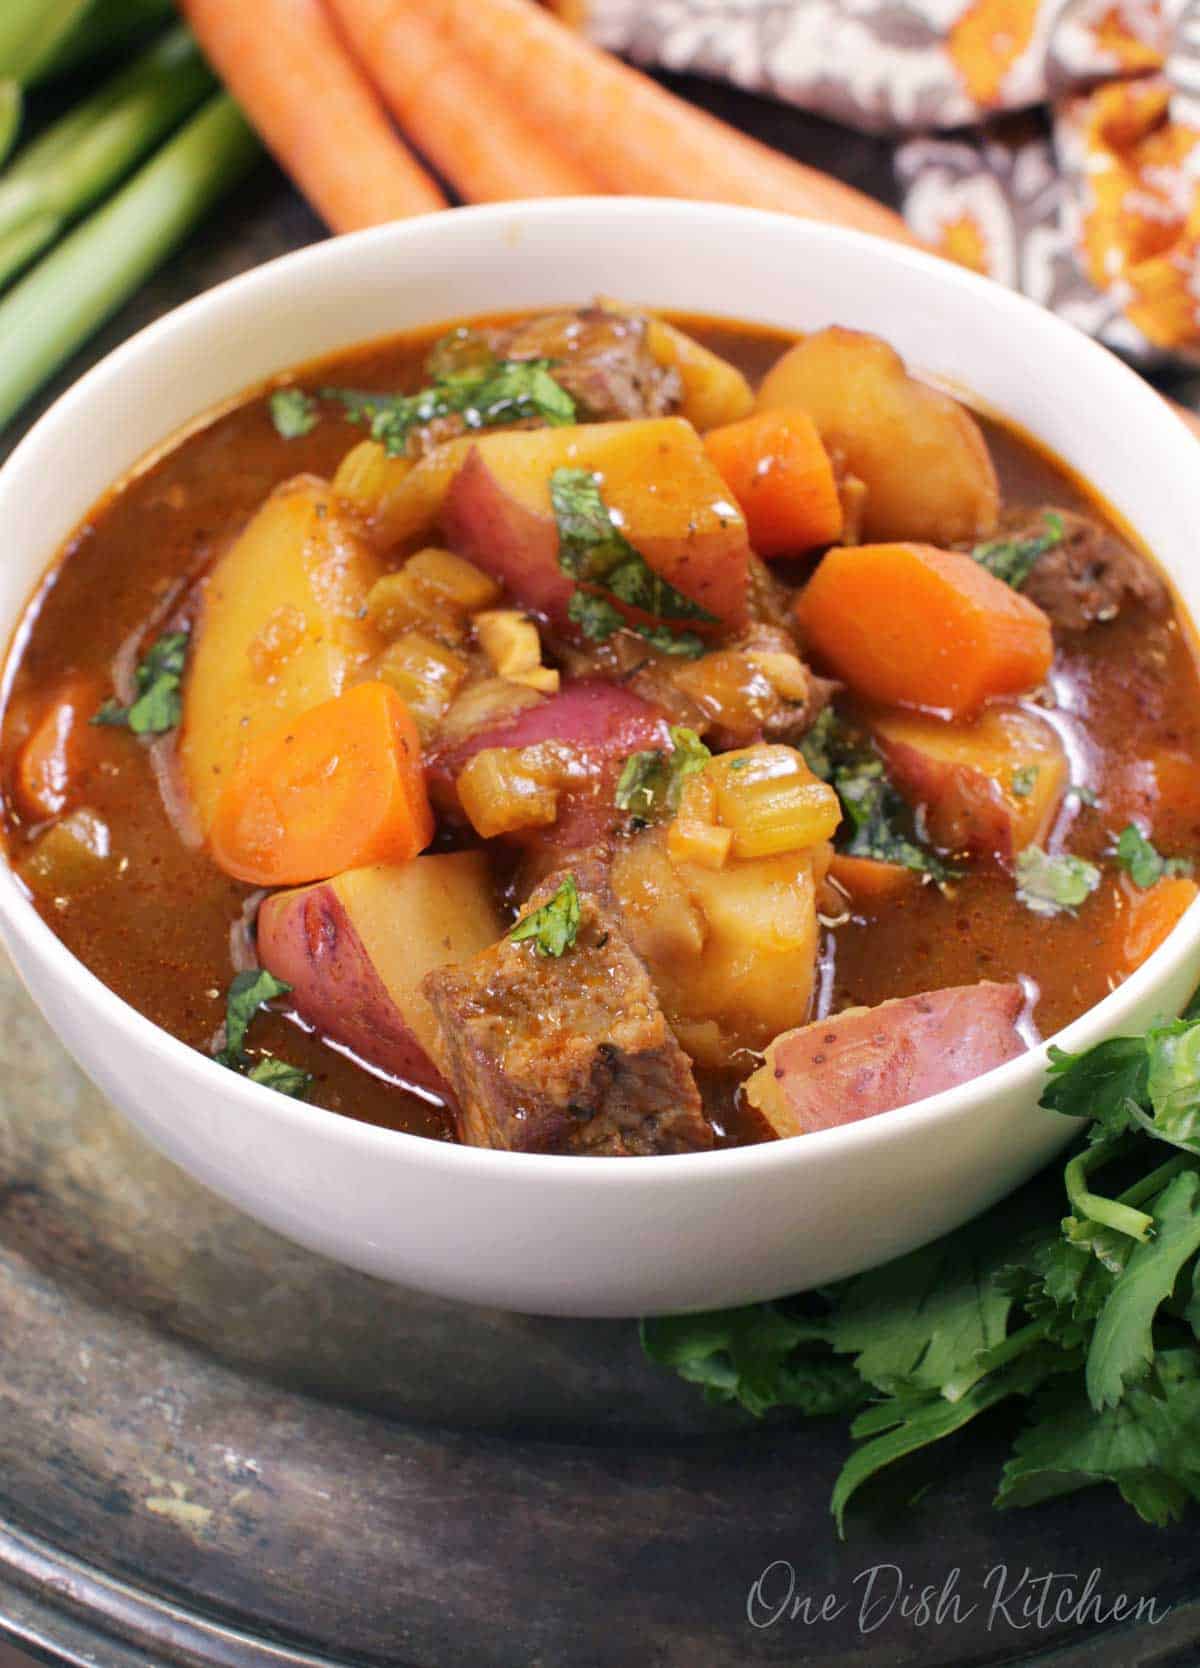 A bowl of irish stew filled with lamb and potatoes next to three carrots.